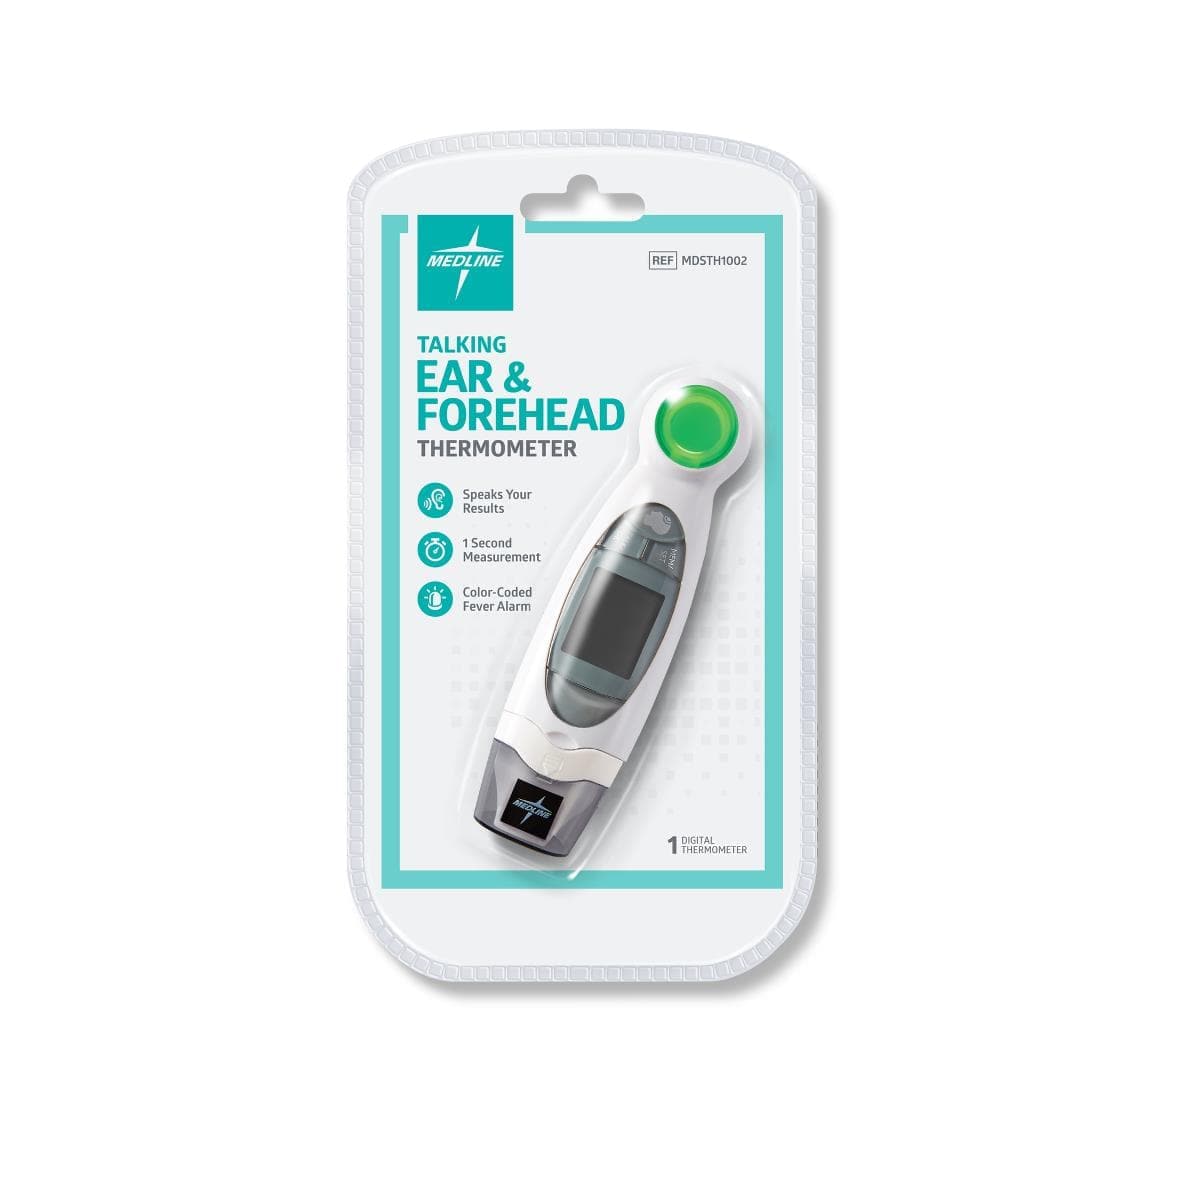 Medline Medline Talking Ear and Forehead Thermometer for Home Use